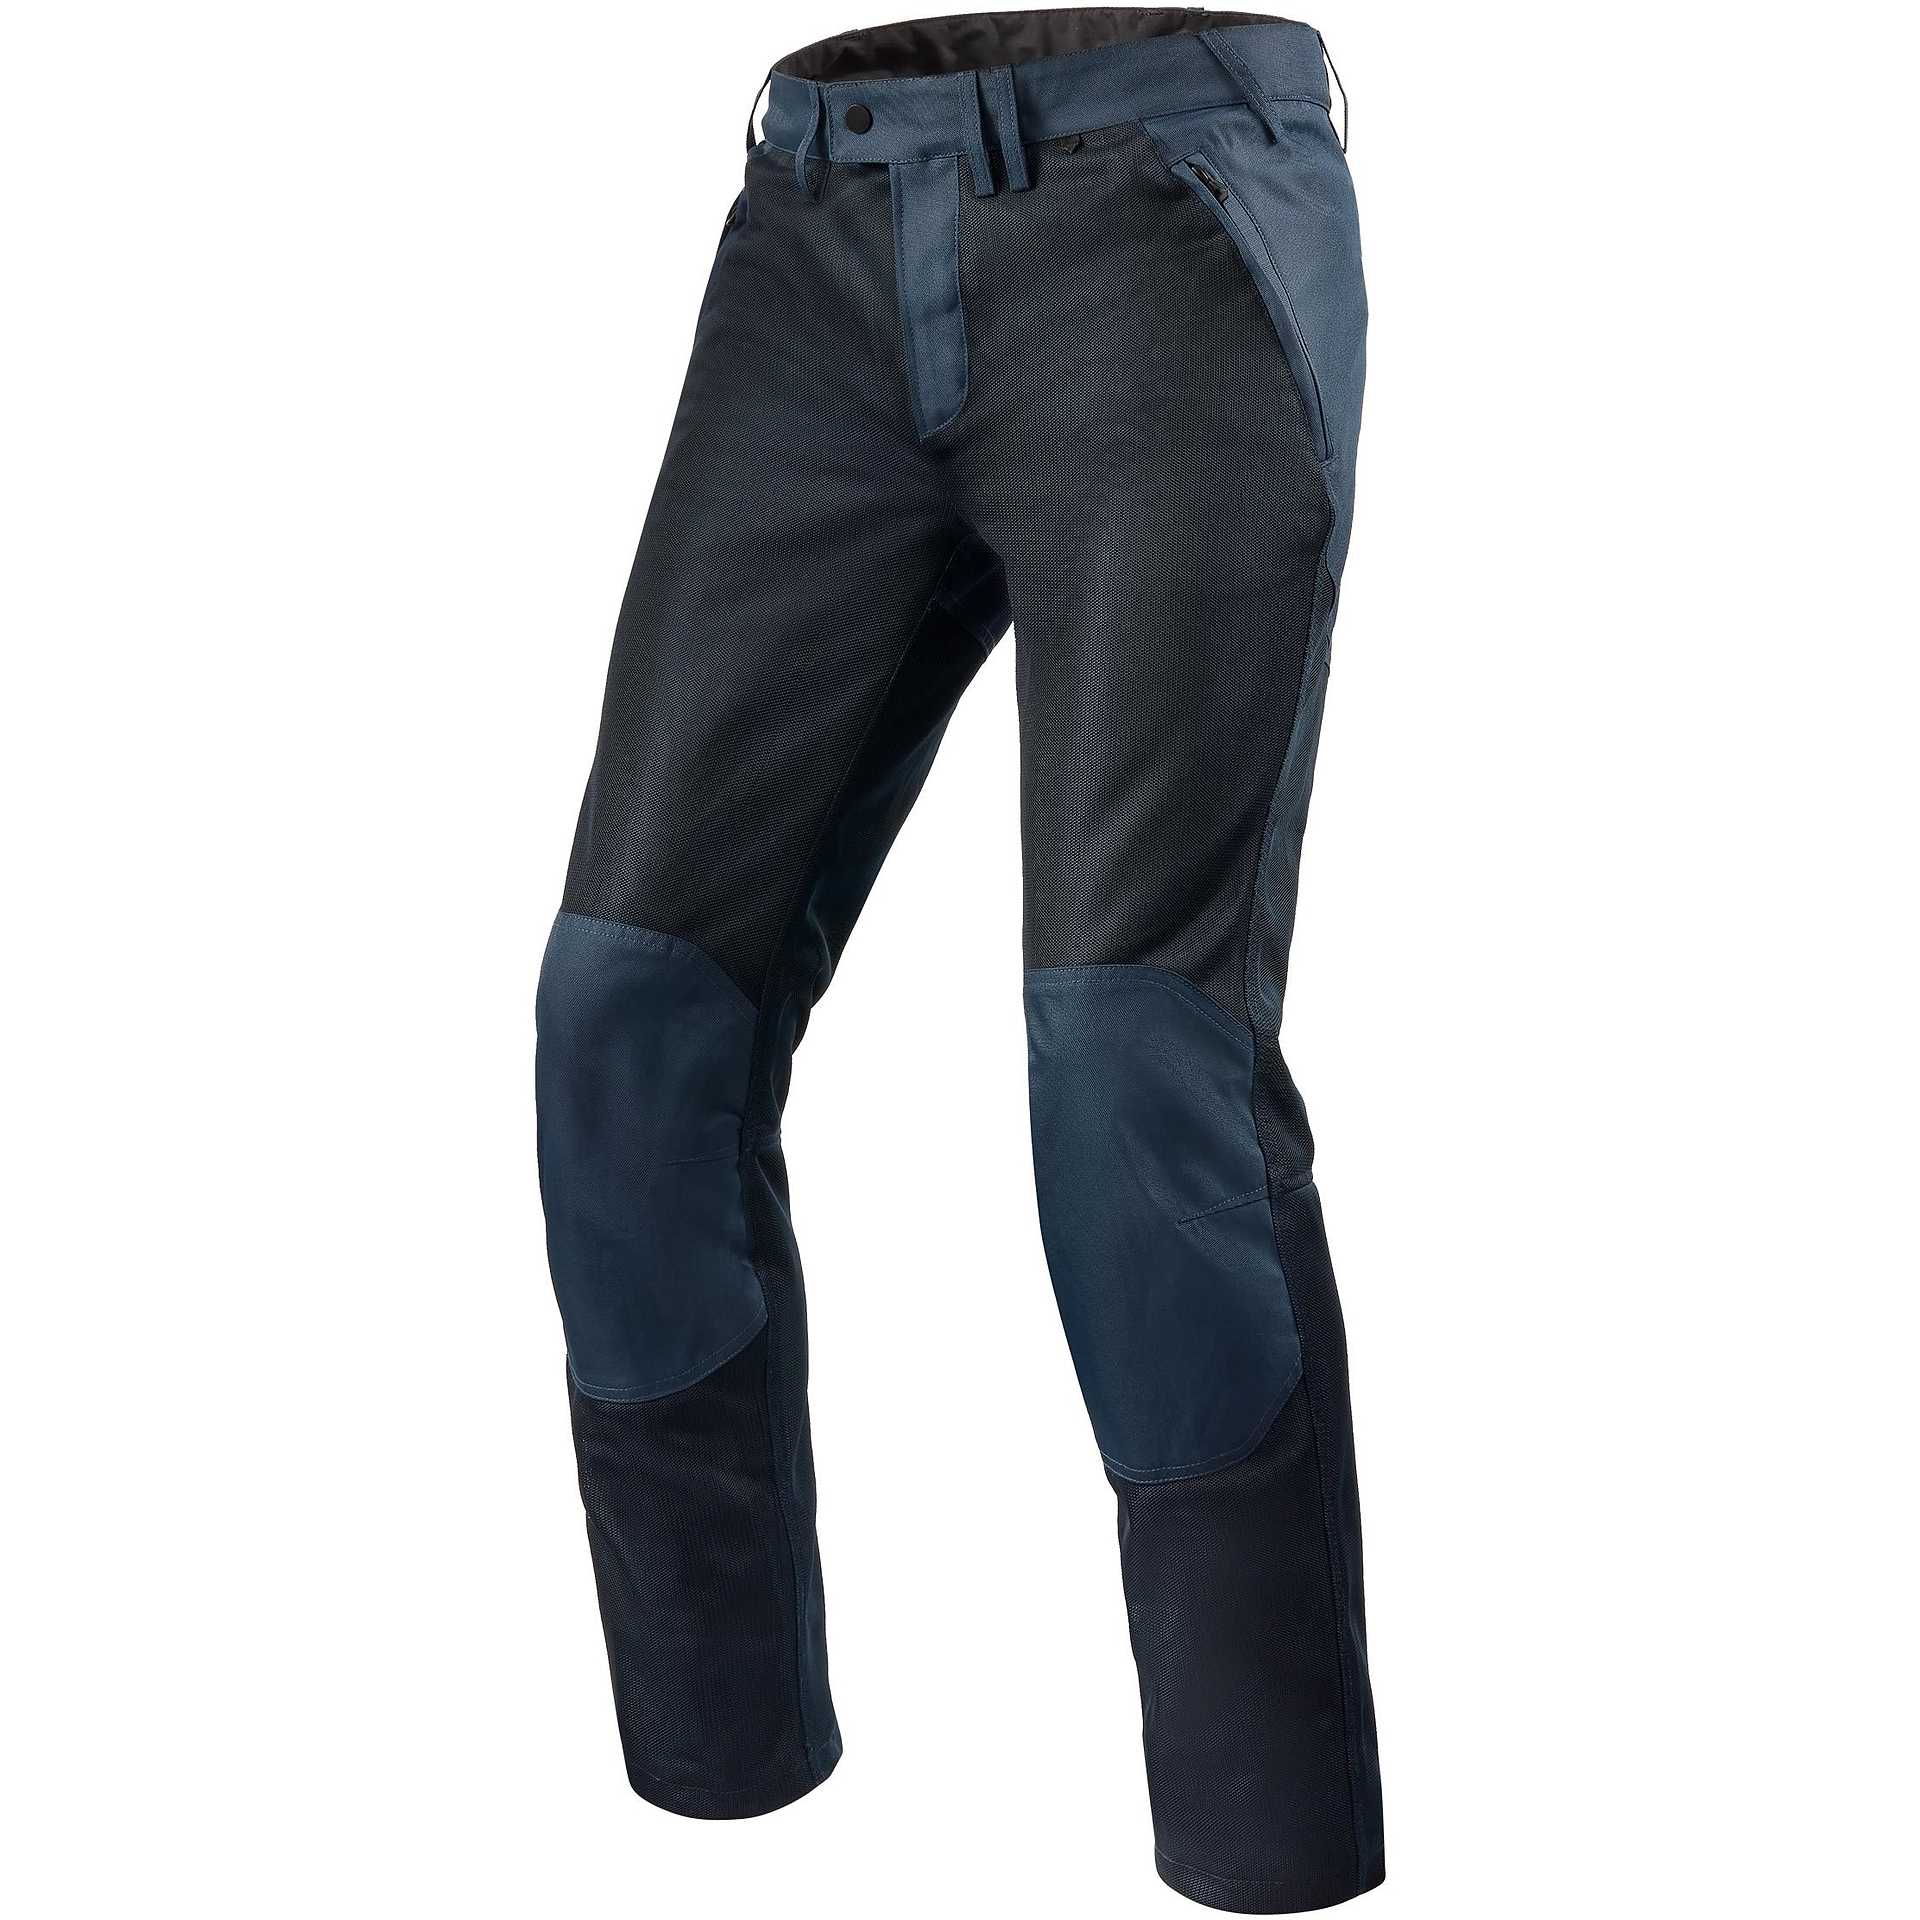 The best MTB pants you can buy – 8 bike pants in review | Page 8 of 9 |  ENDURO Mountainbike Magazine